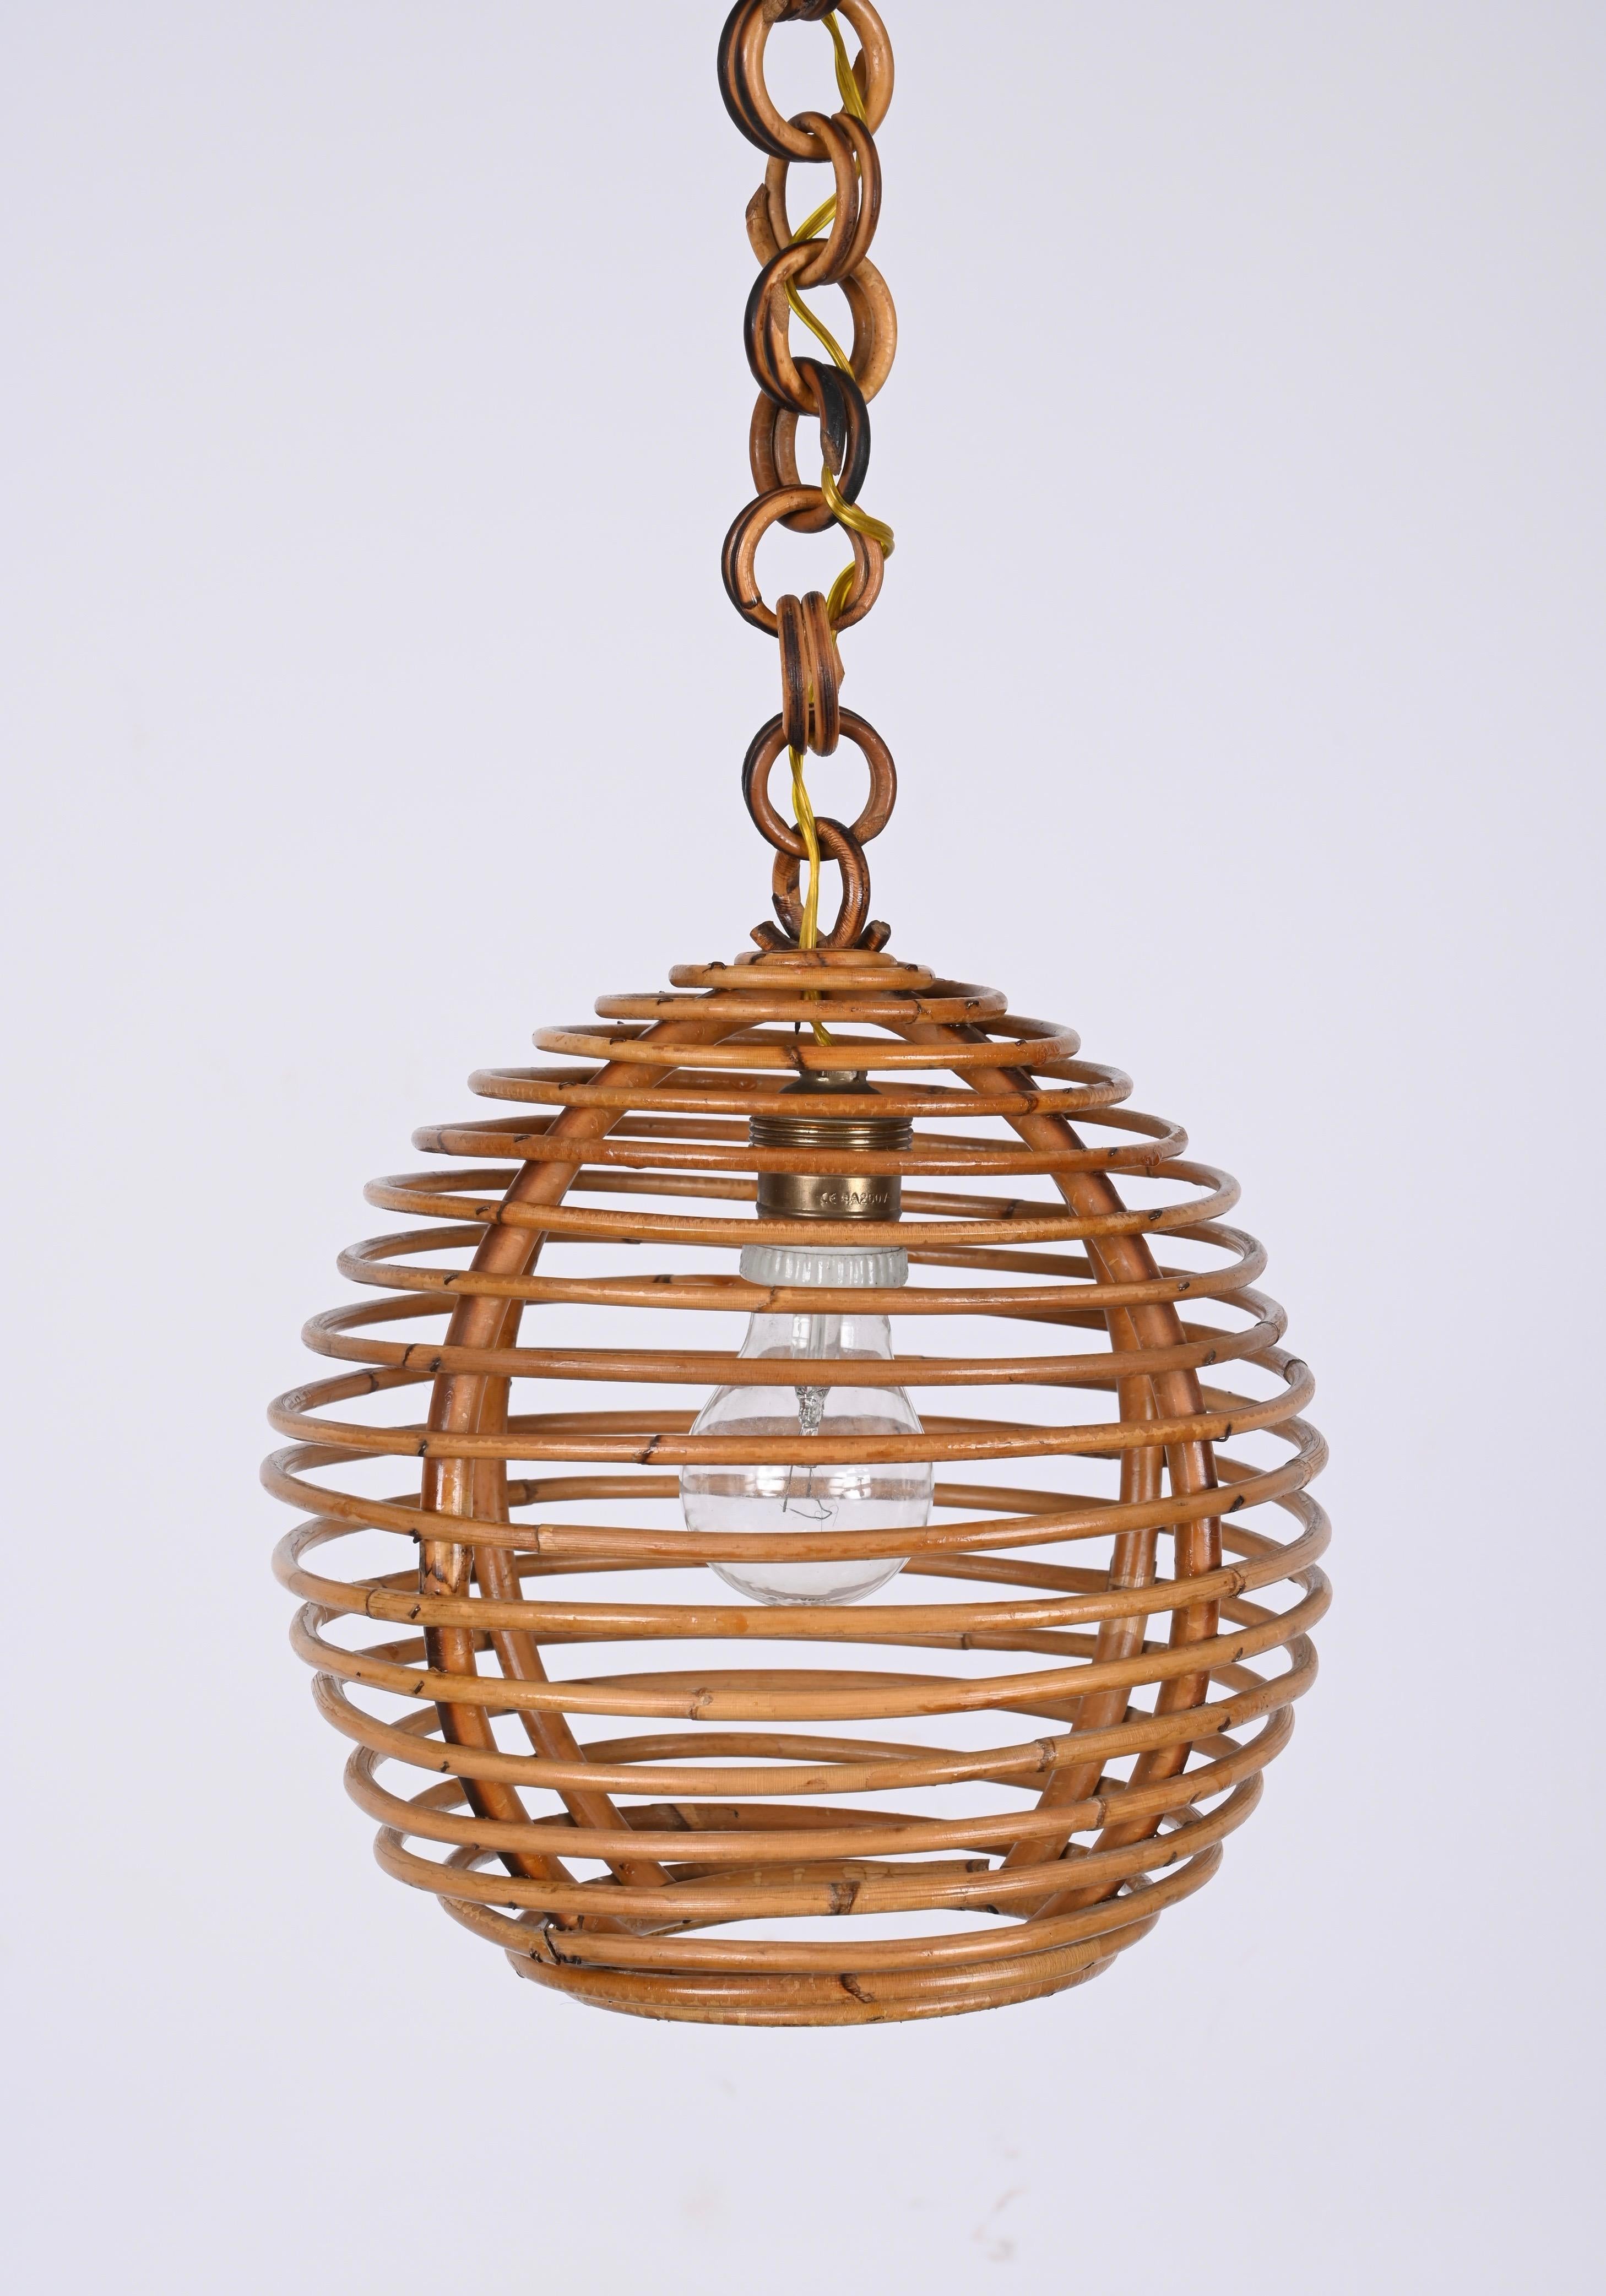 Midcentury French Riviera Bambo and Rattan Spherical Italian Chandelier, 1960s For Sale 11